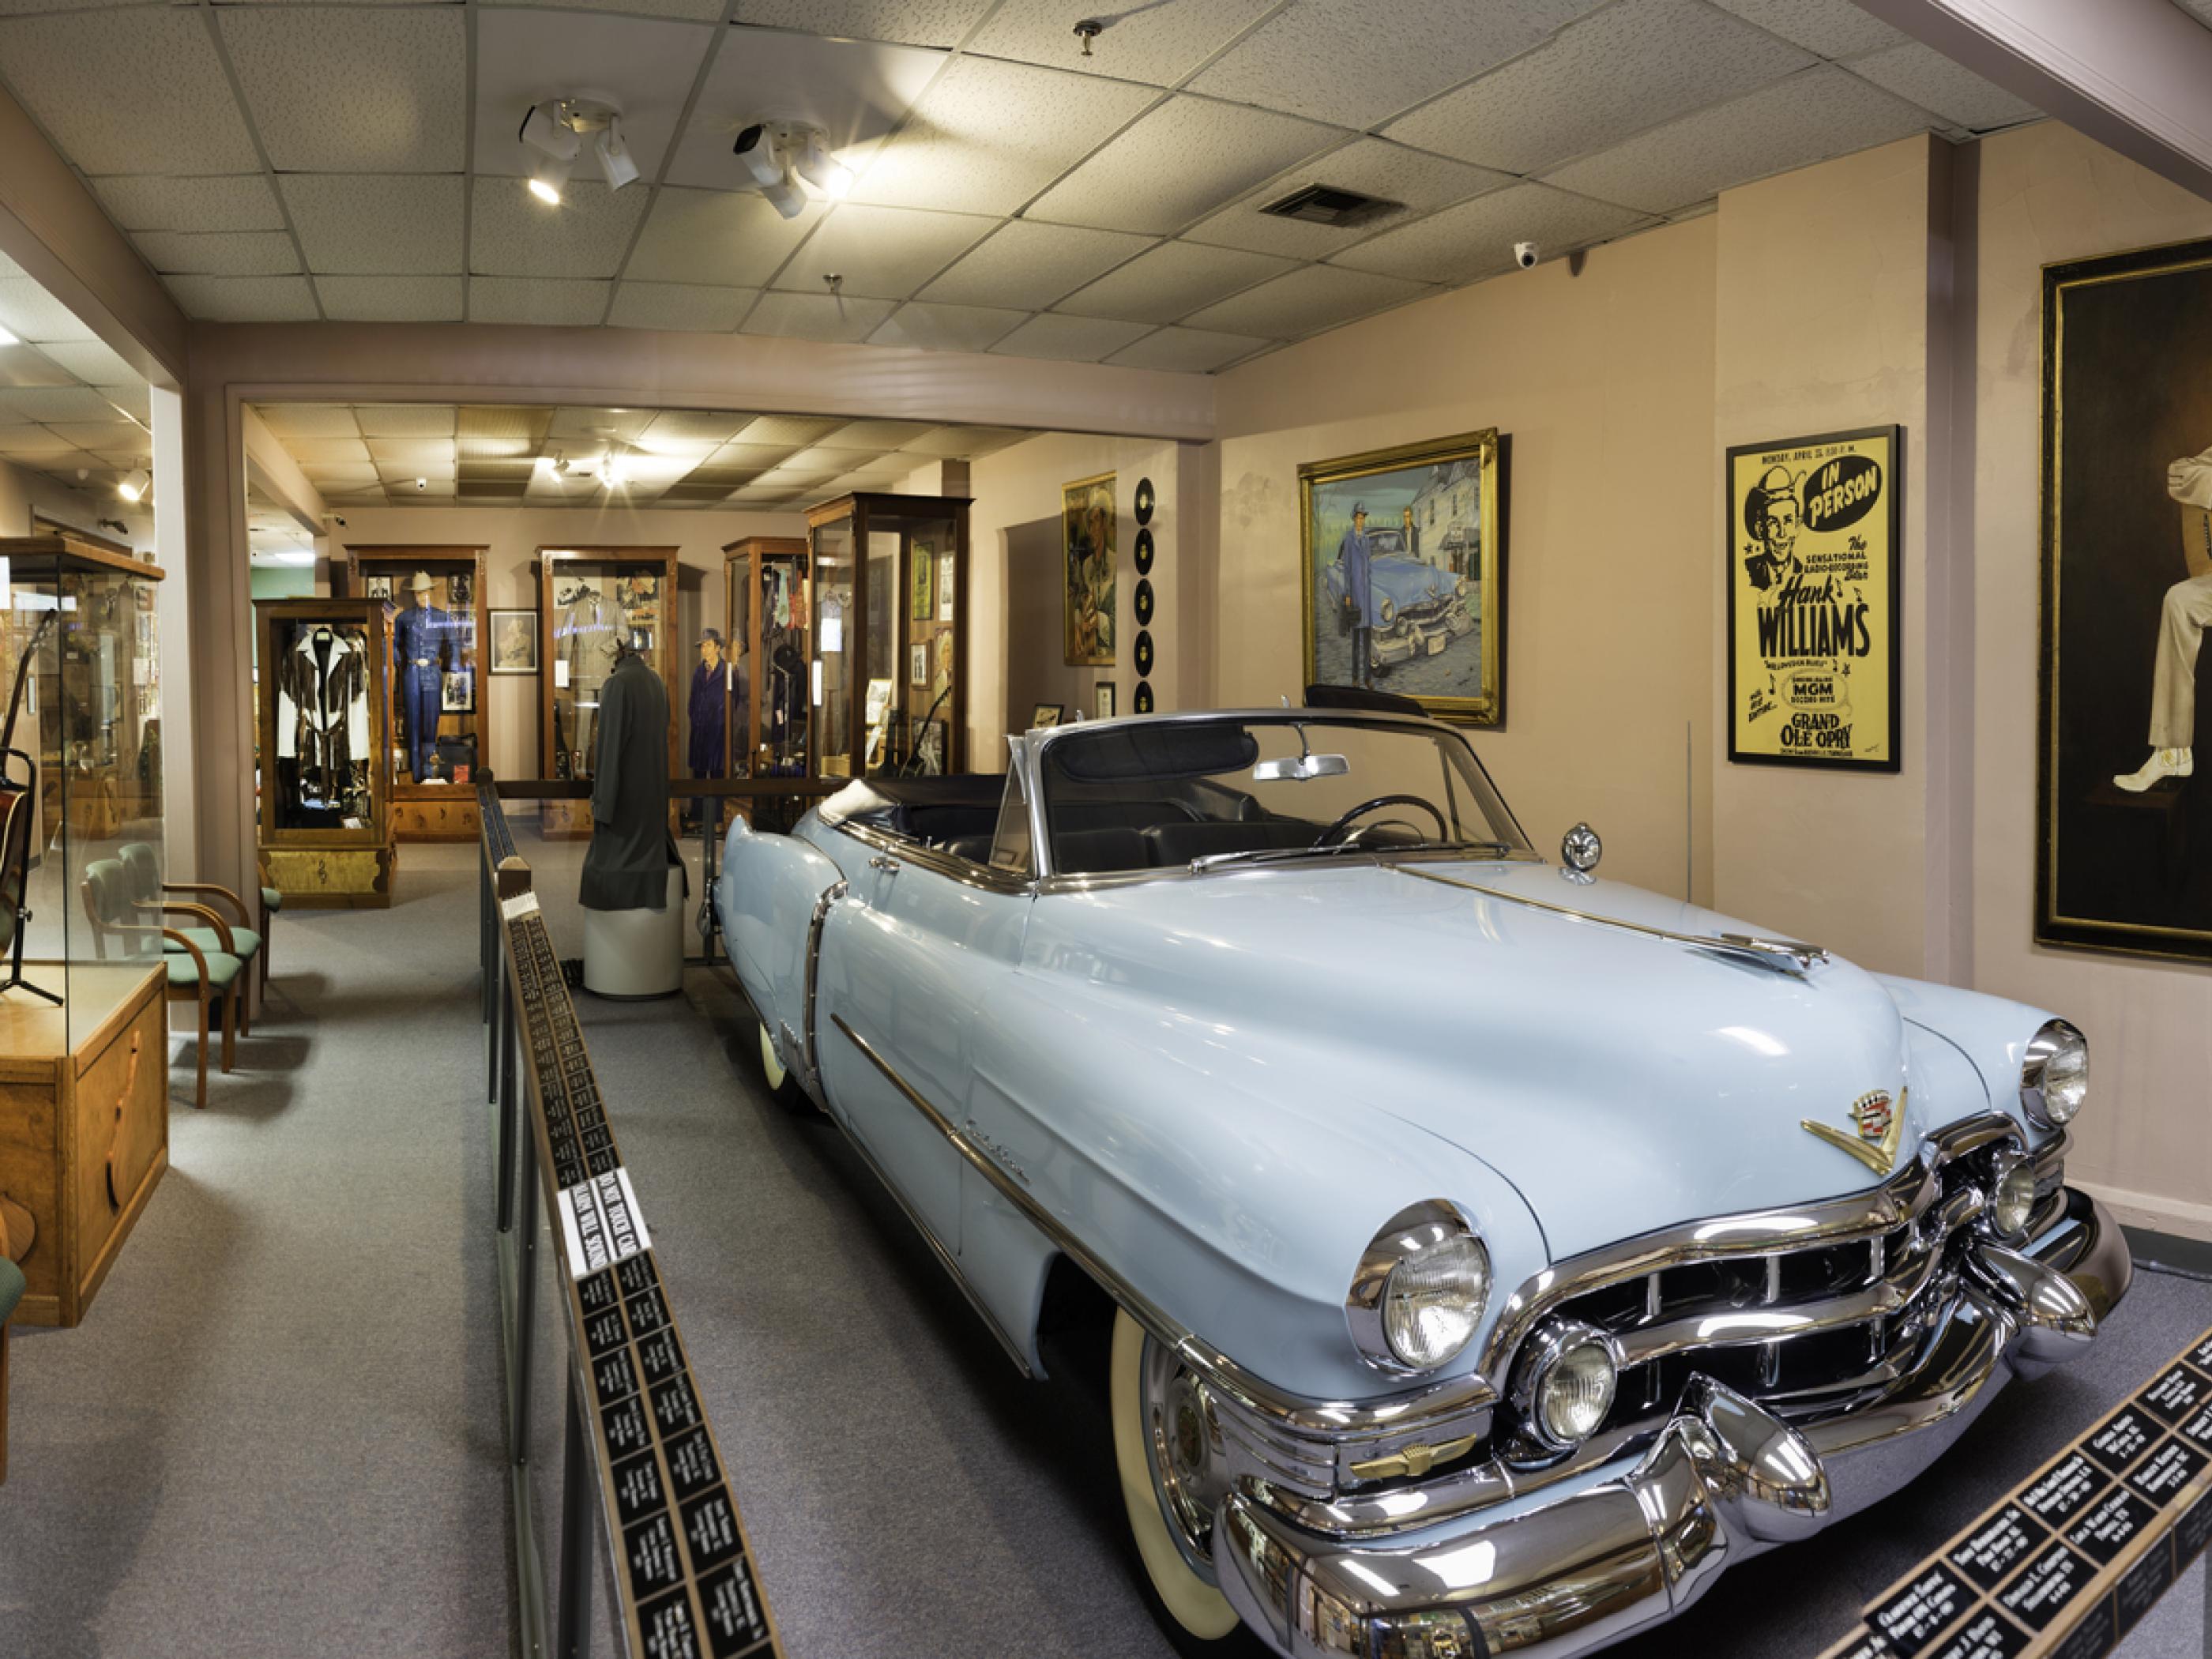 Roadside Museums in Alabama are not just attractions along the side of the highway, they are places of interest and can be very educational.